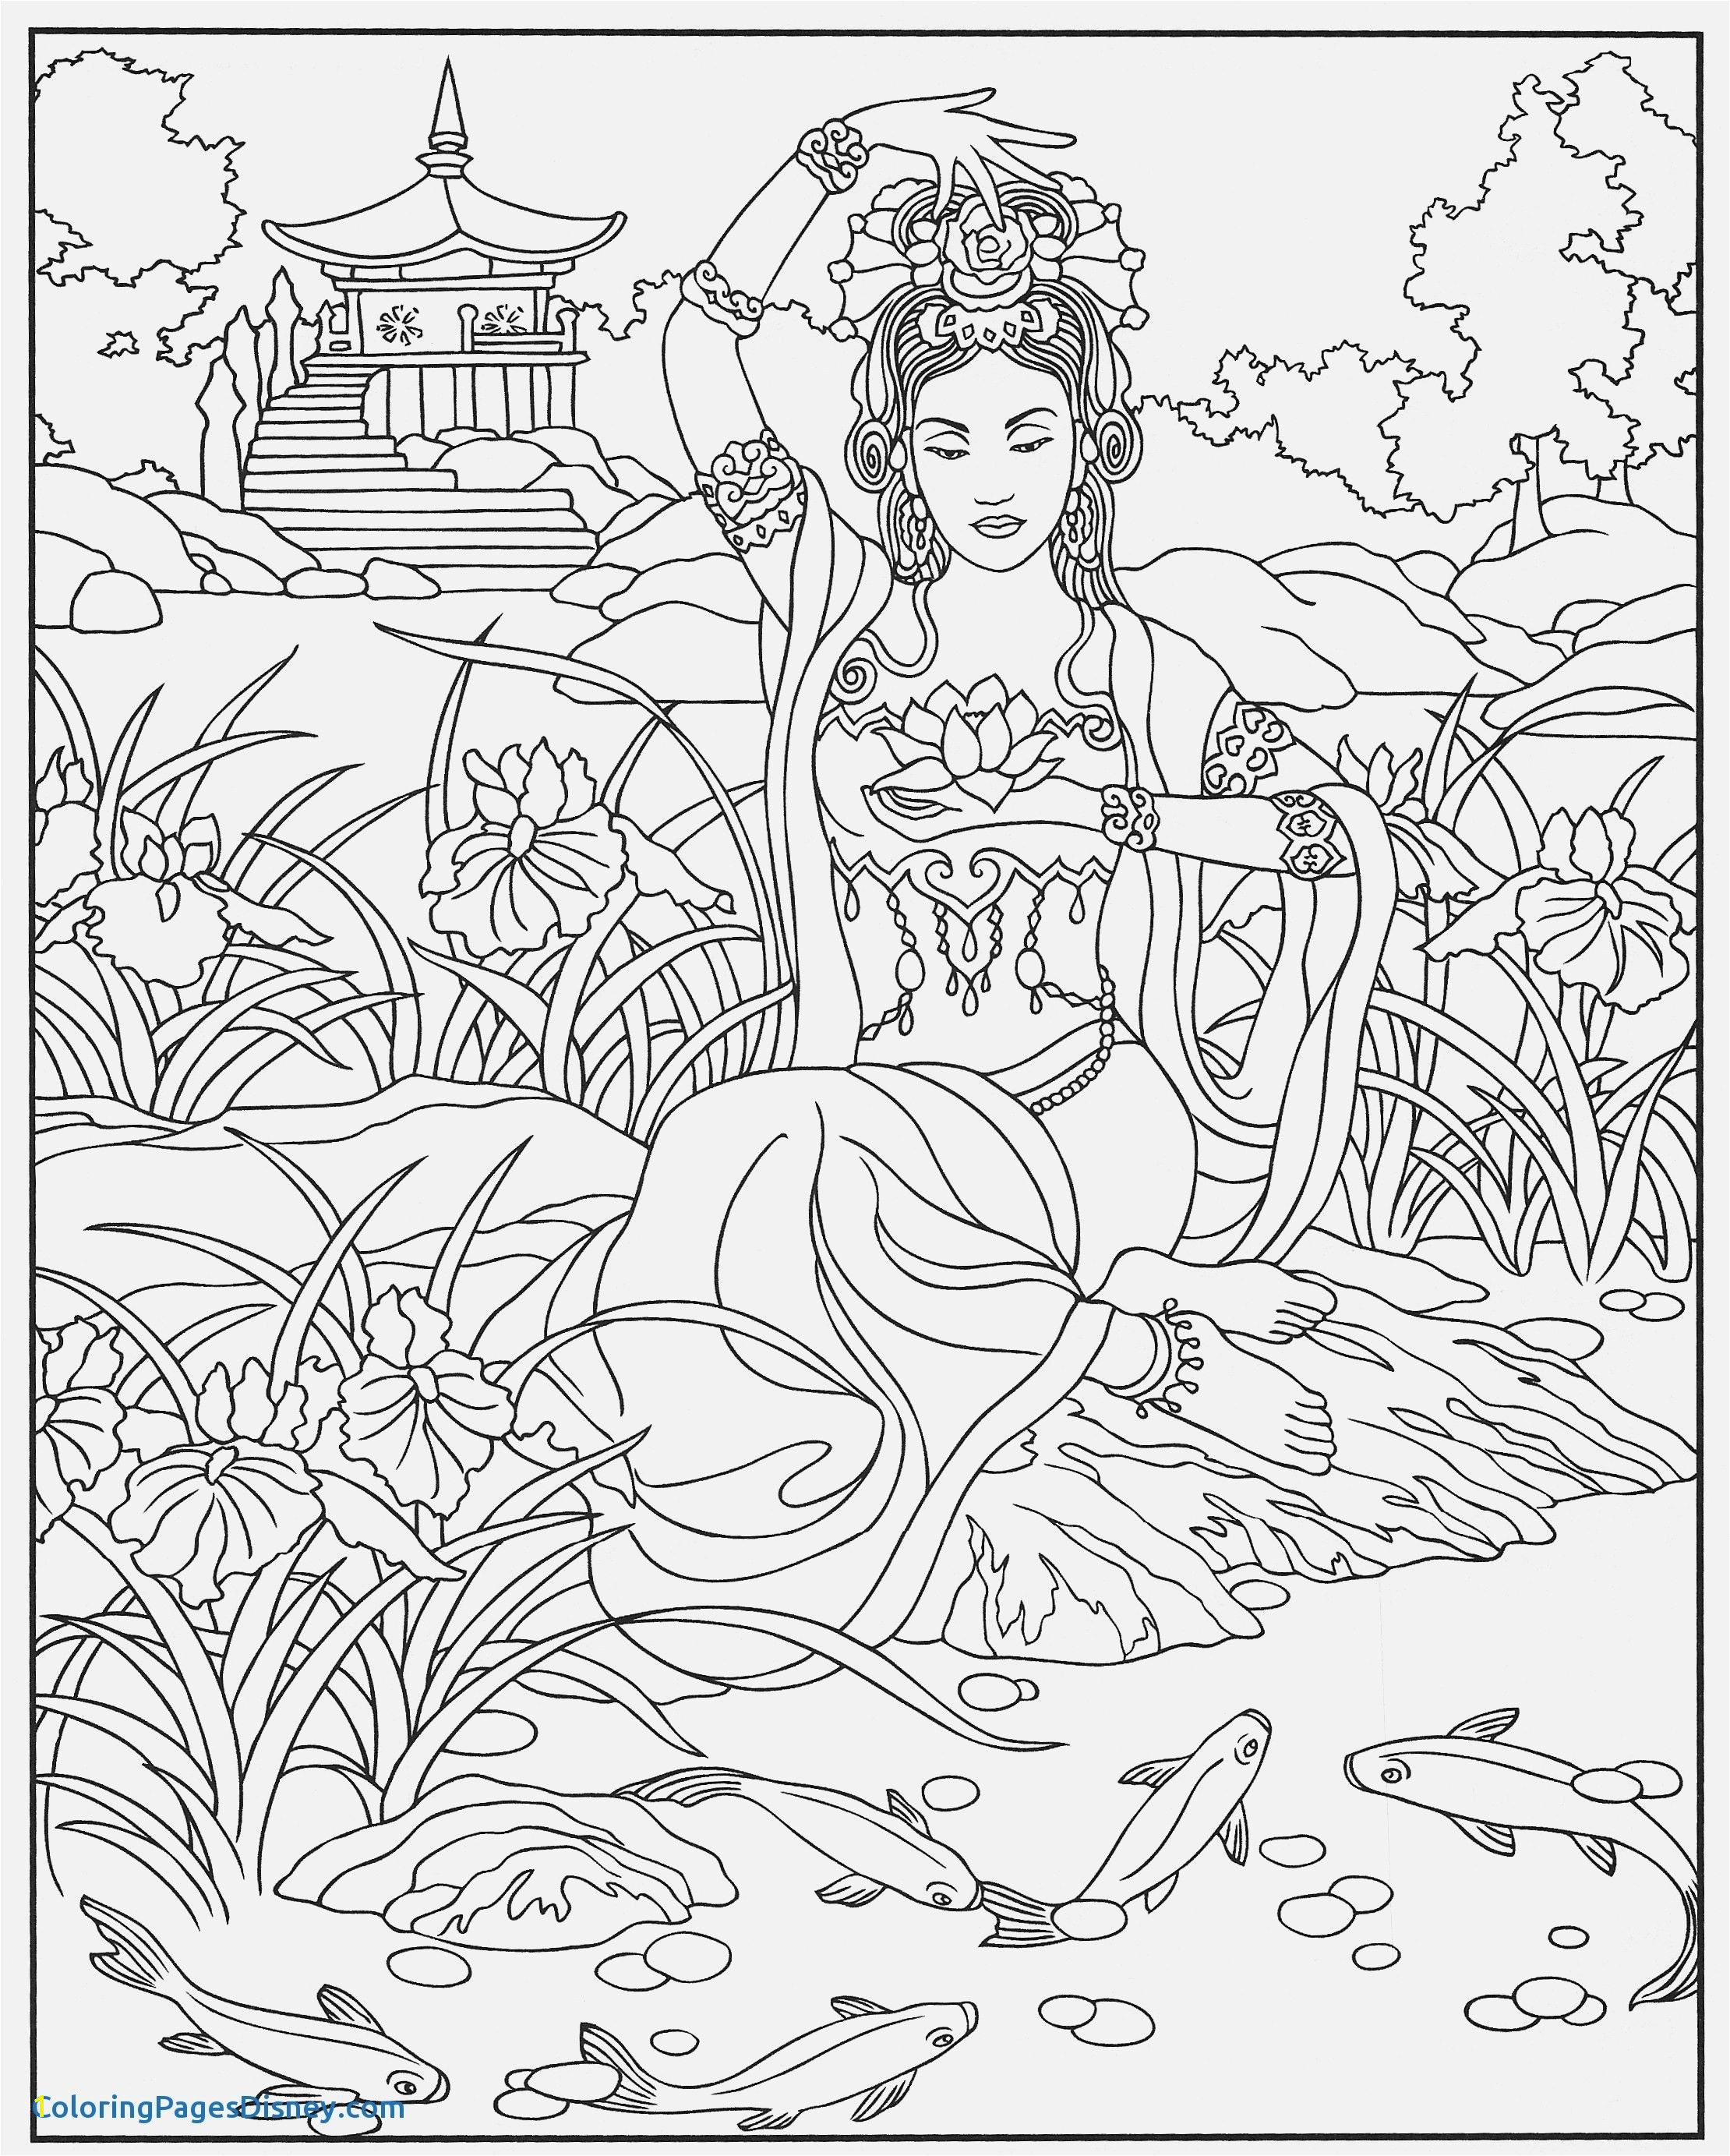 Fashion Coloring Pages – Through the thousand pictures on the net concerning fashion coloring pages